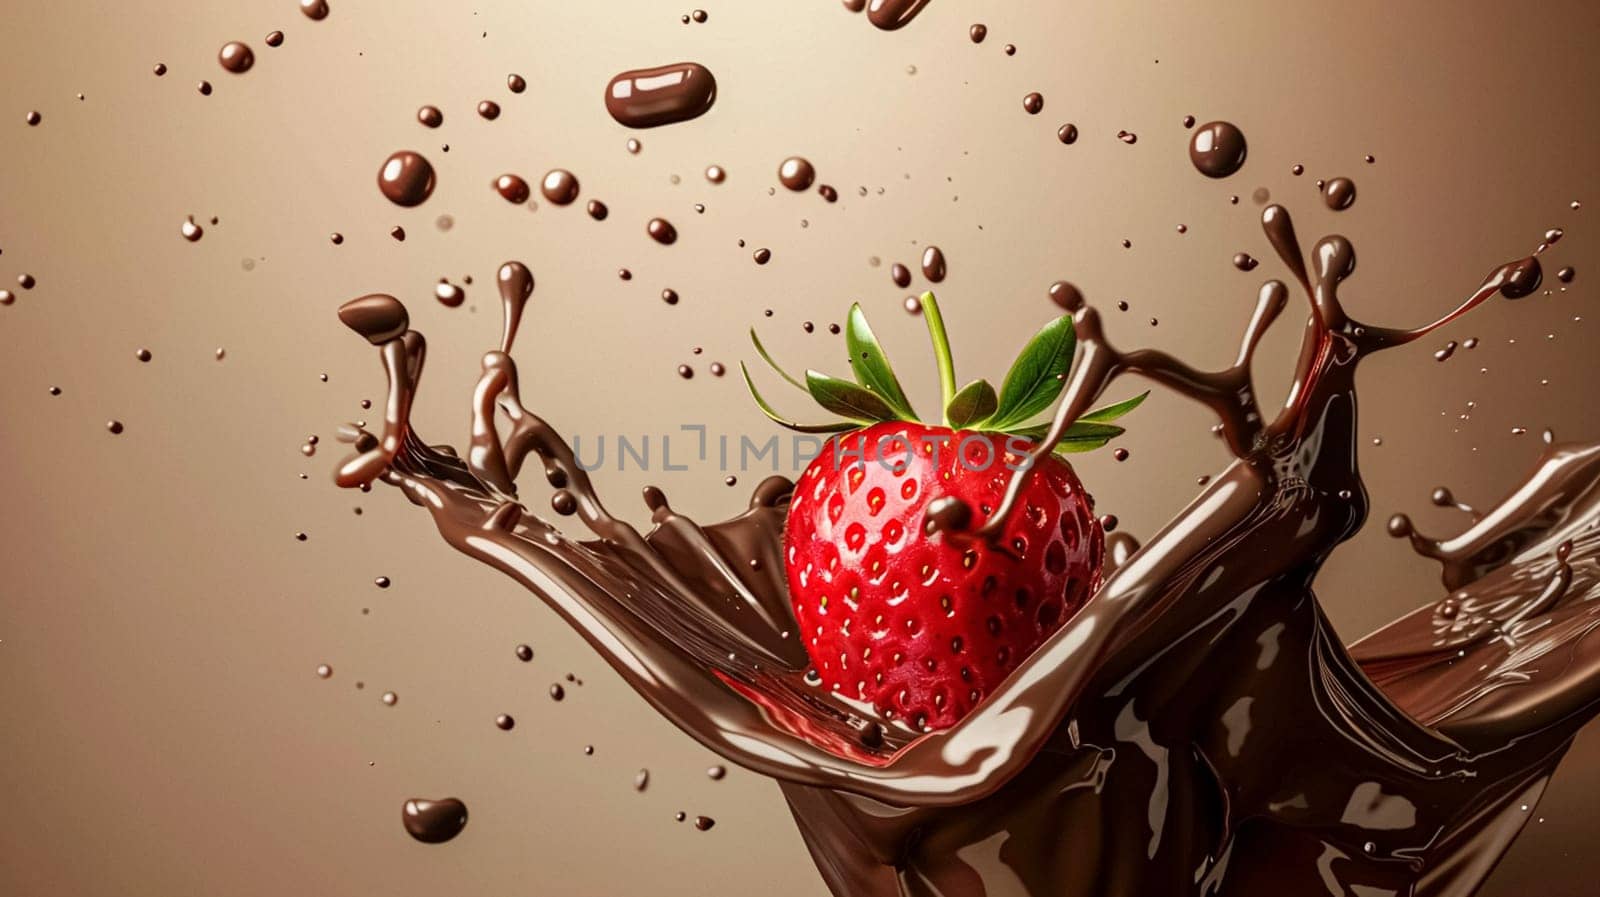 Strawberry falling into melted liquid chocolate, food dessert and confectionery industry by Anneleven